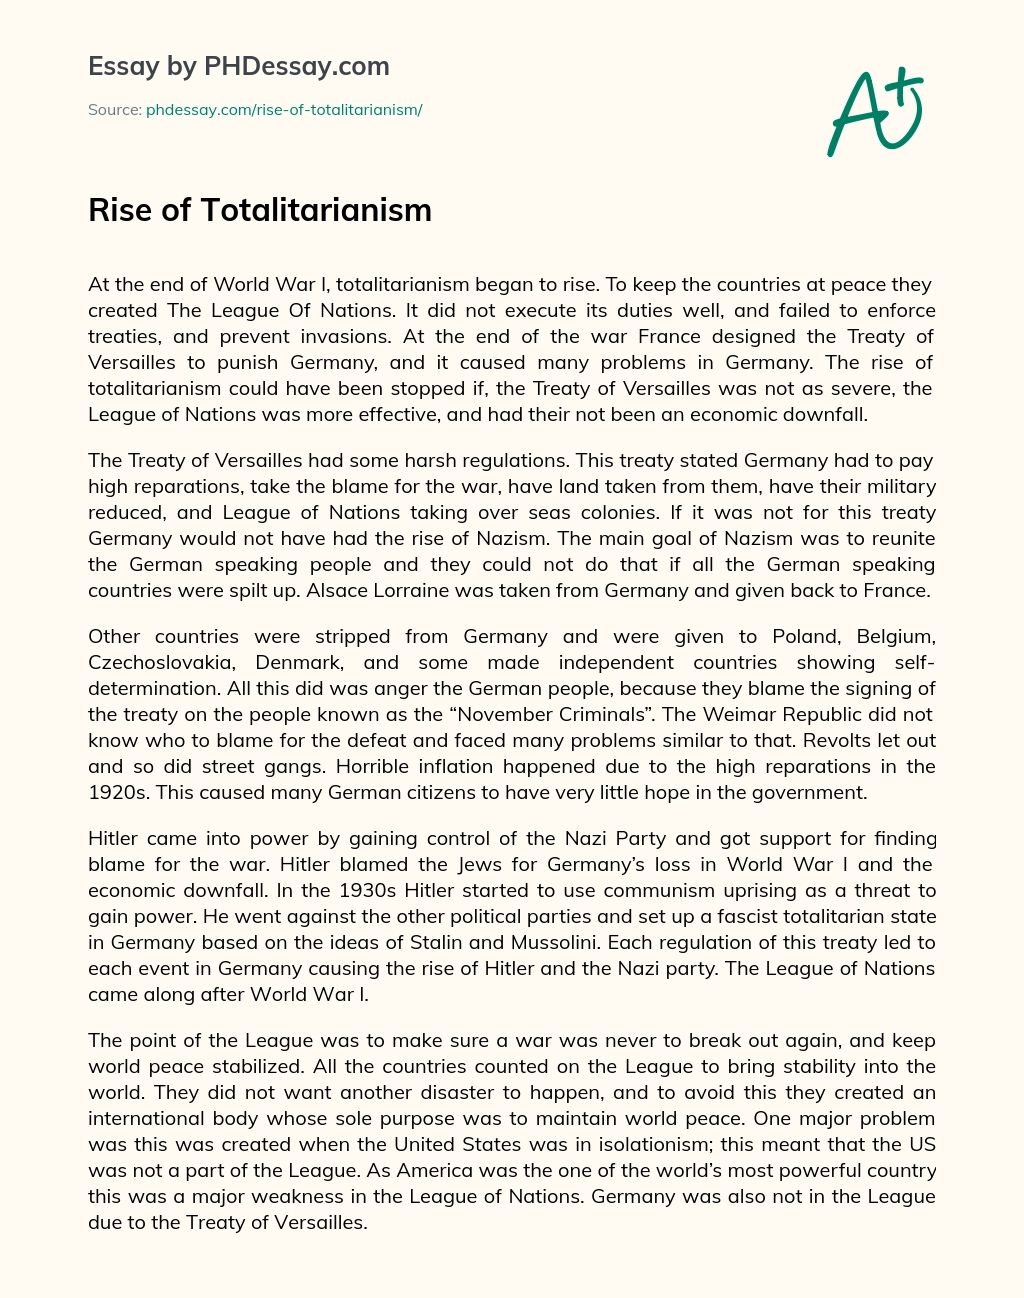 Rise of Totalitarianism essay